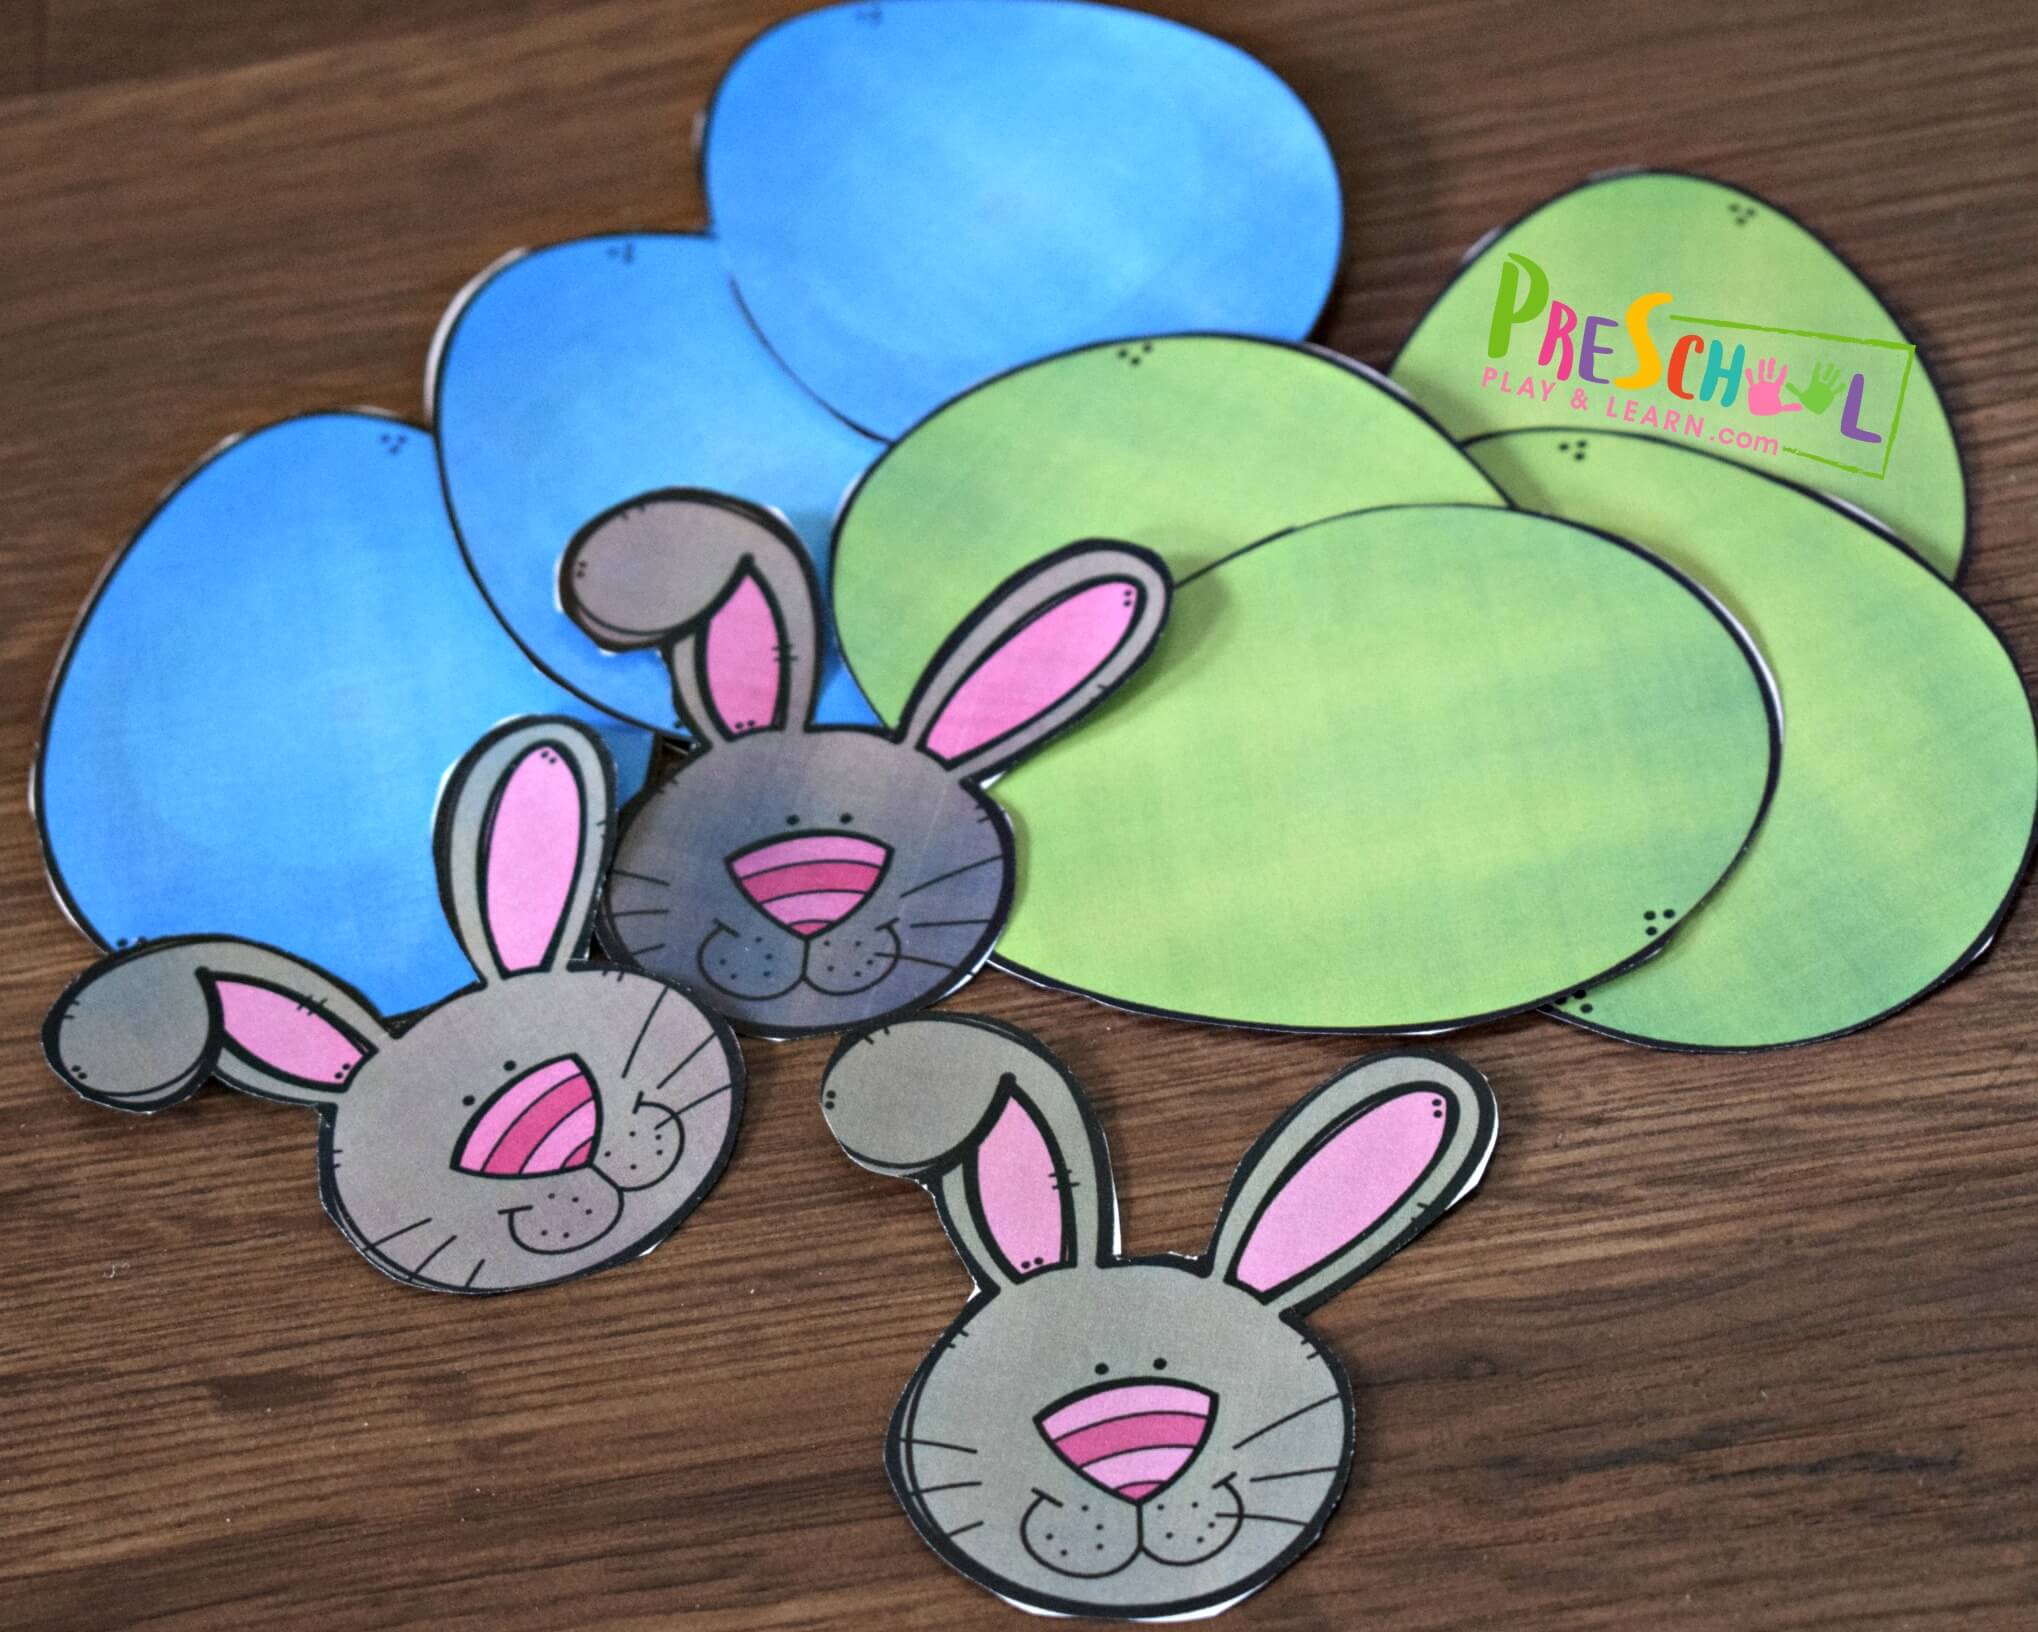 free-printable-easter-crafts-for-kids